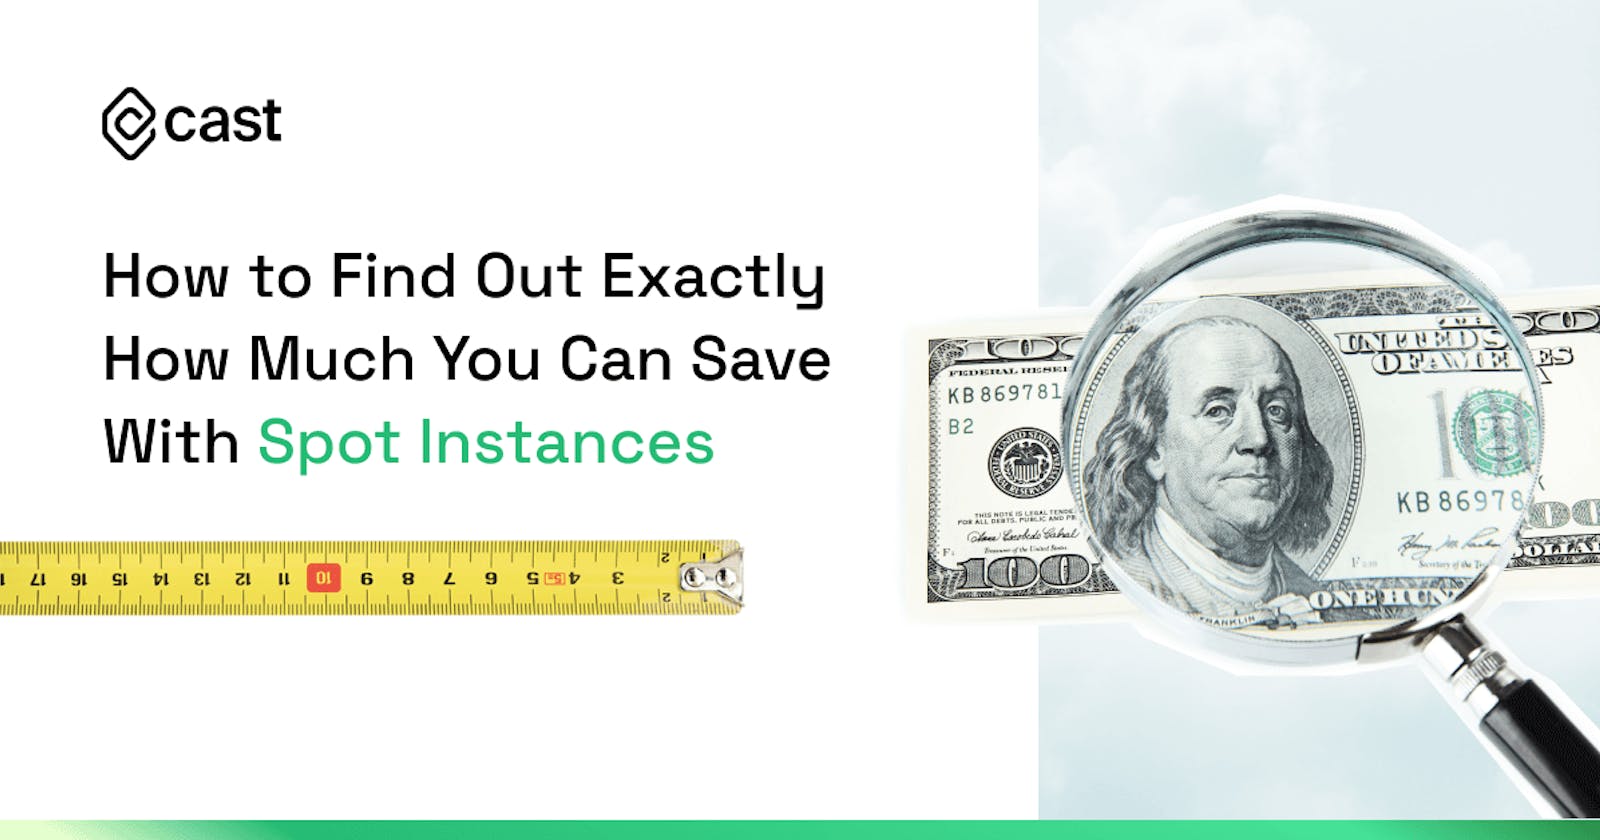 How to Find Out Exactly How Much You Can Save with Spot Instances